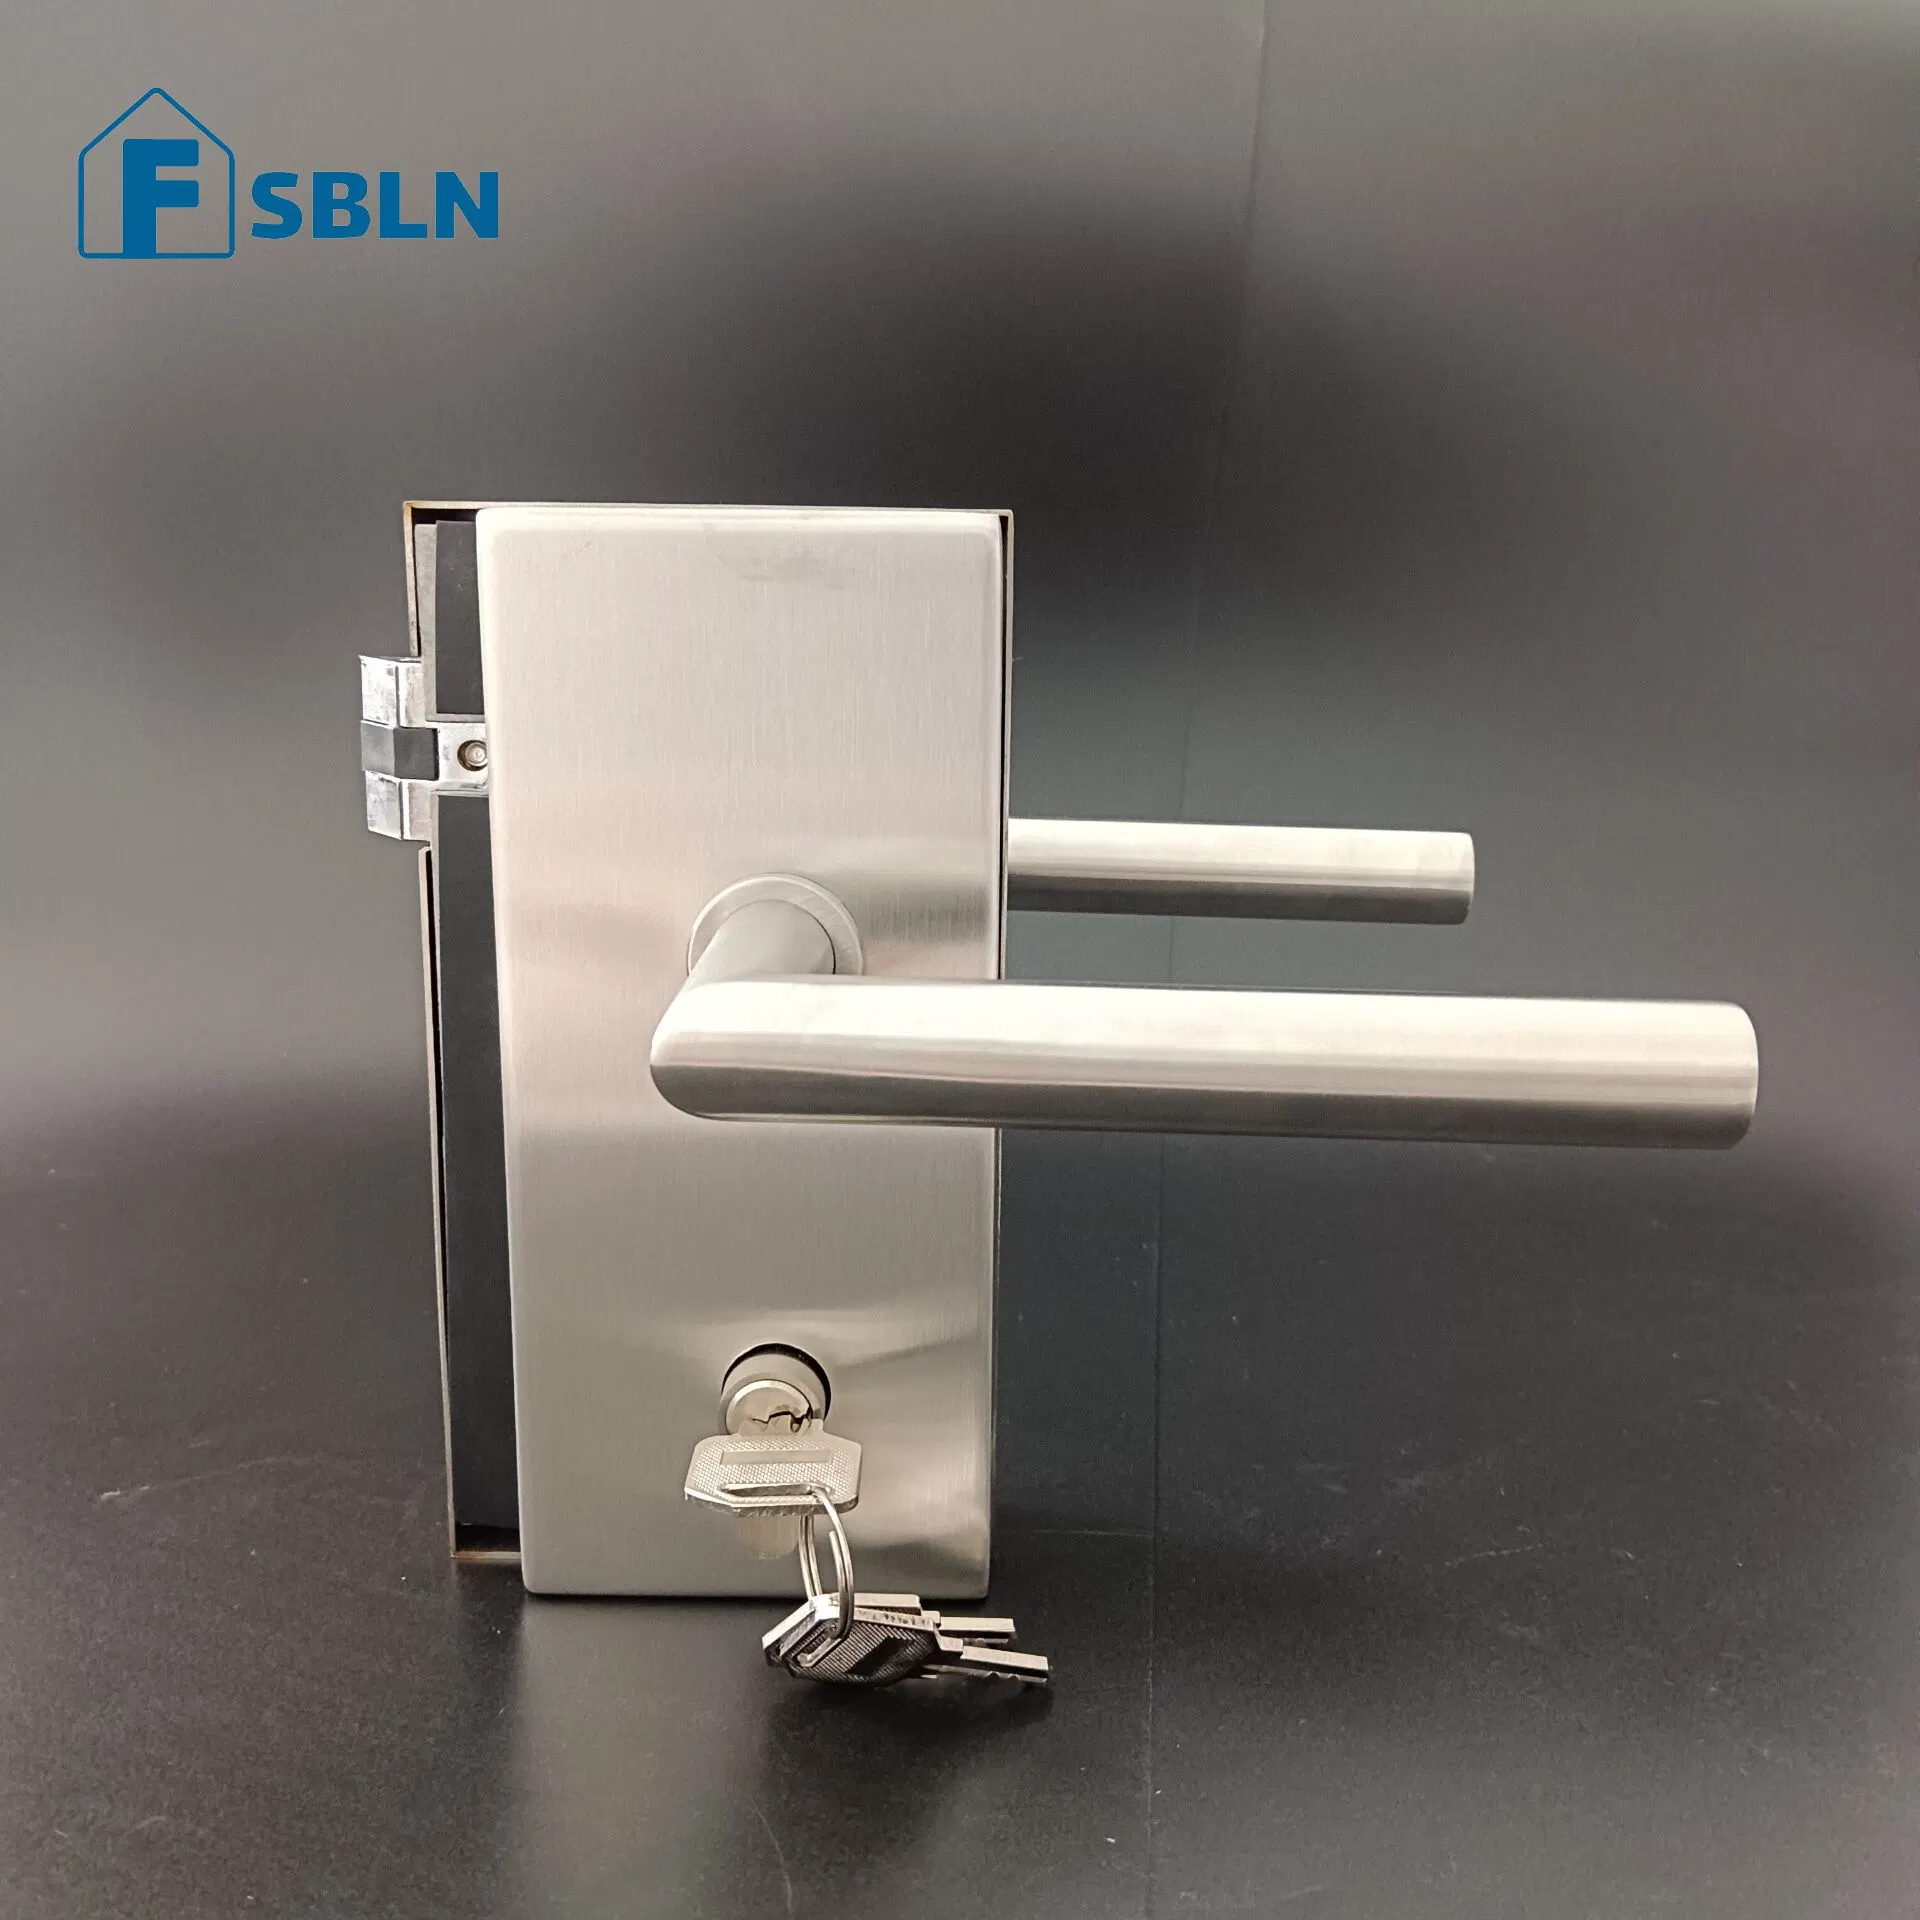 Bln High Quality Glass Door Lock Box Glass Door Clamp Patch Fitting for Office Hardware